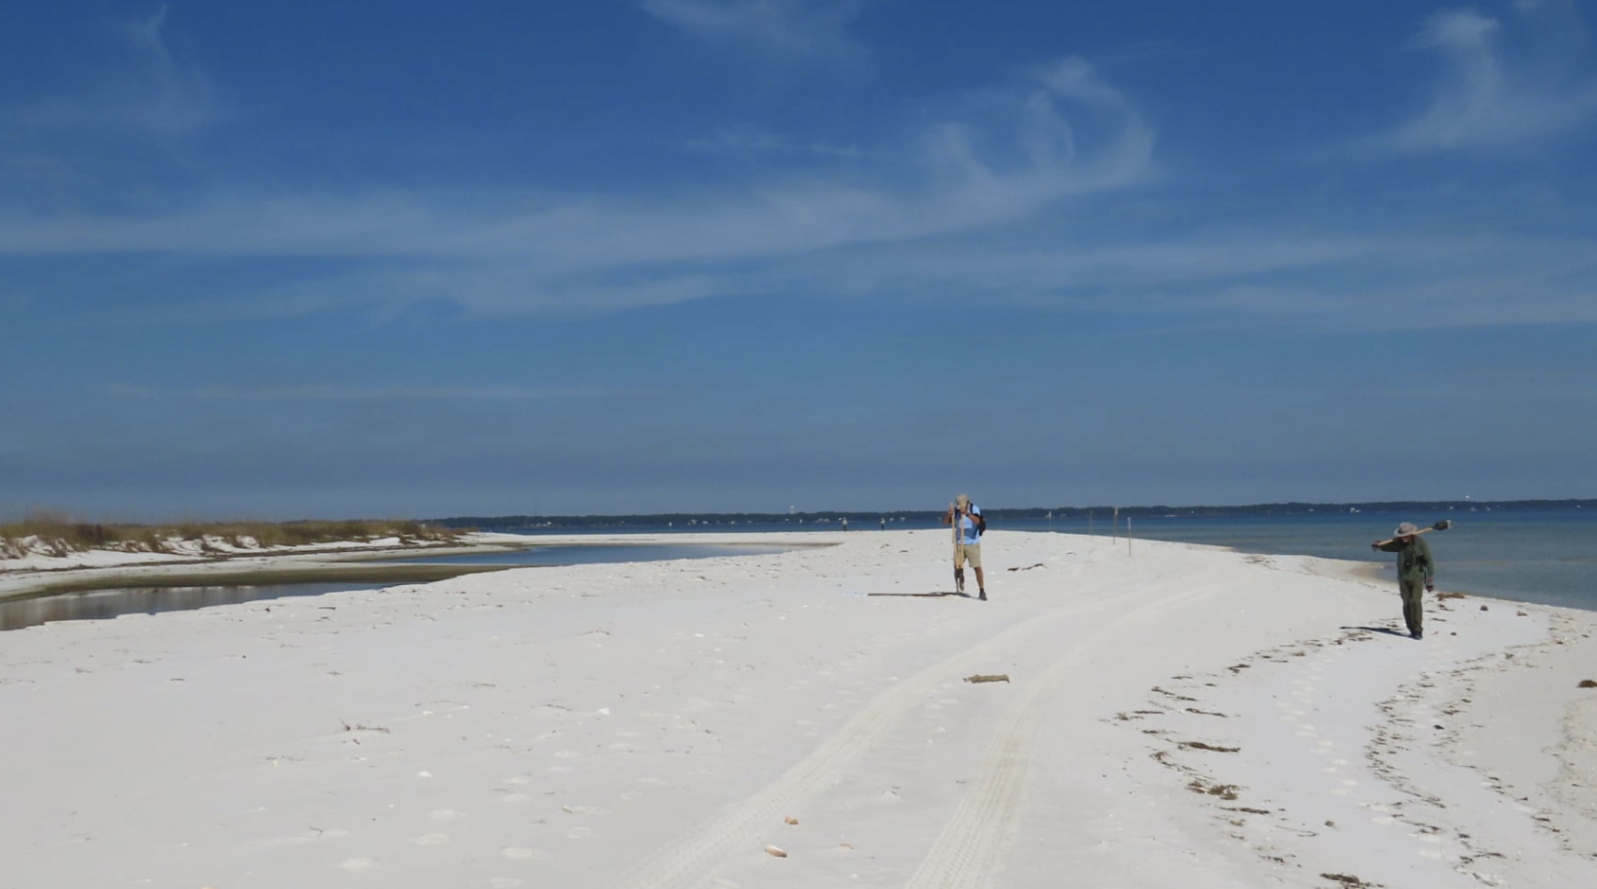 A beach with a man posting a wooden stake, with Gulf of Mexico in the background.